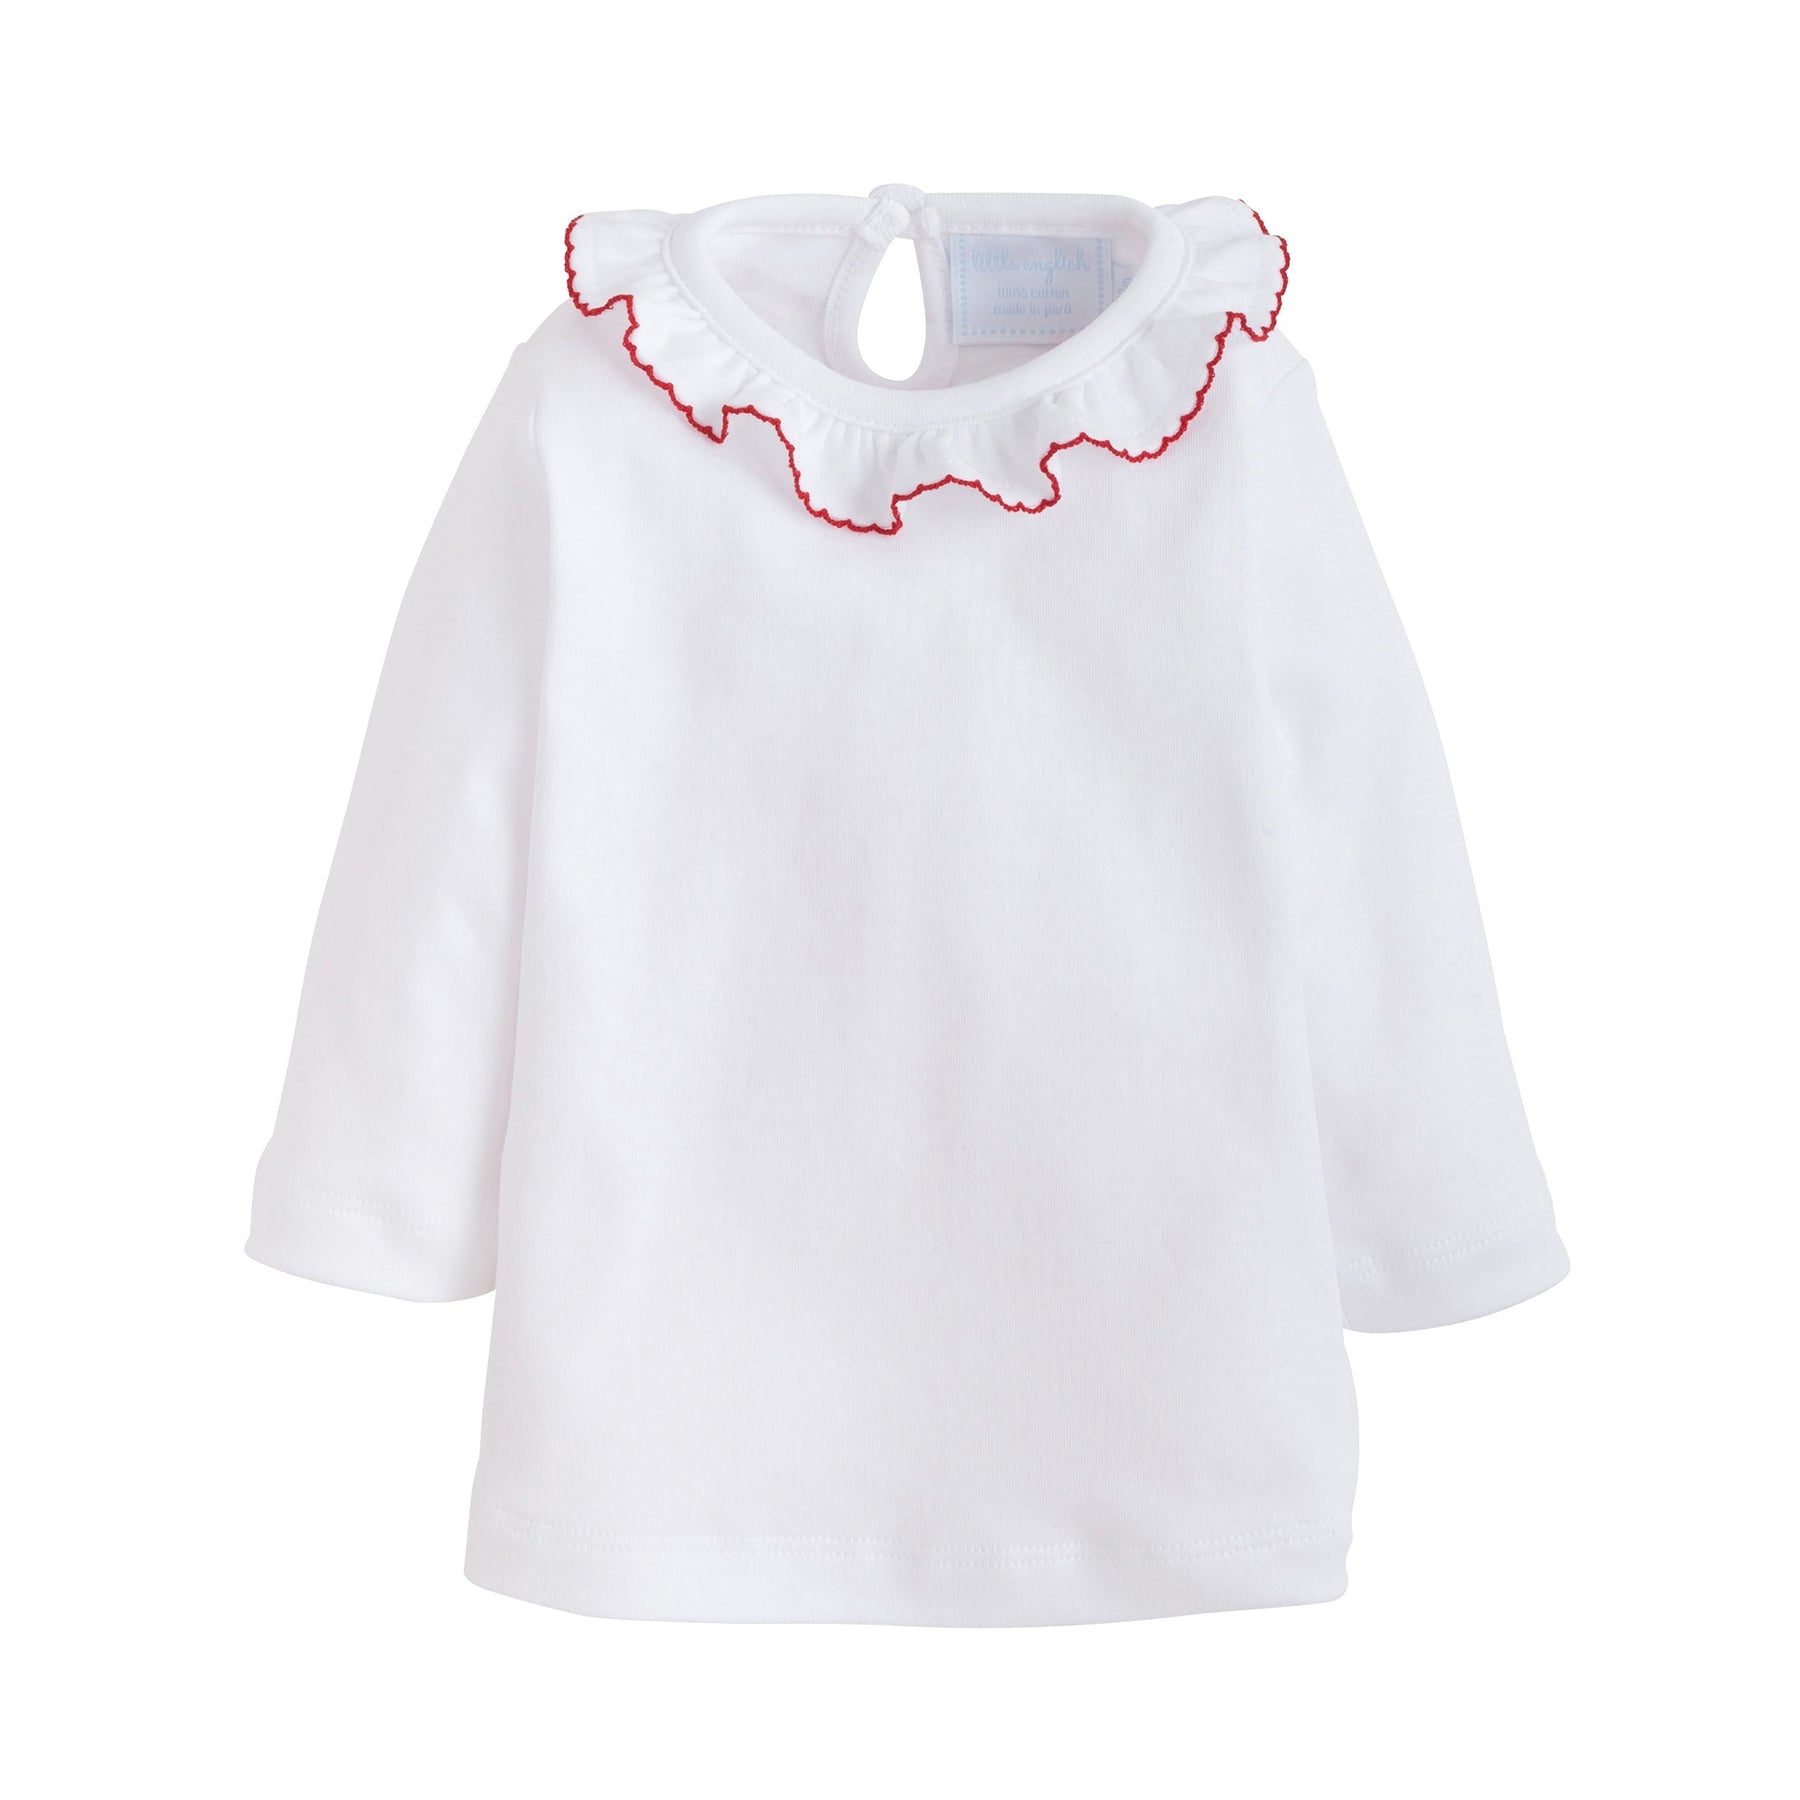 seguridadindustrialcr classic childrens clothing girls white blouse with ruffled collar and red picot trim